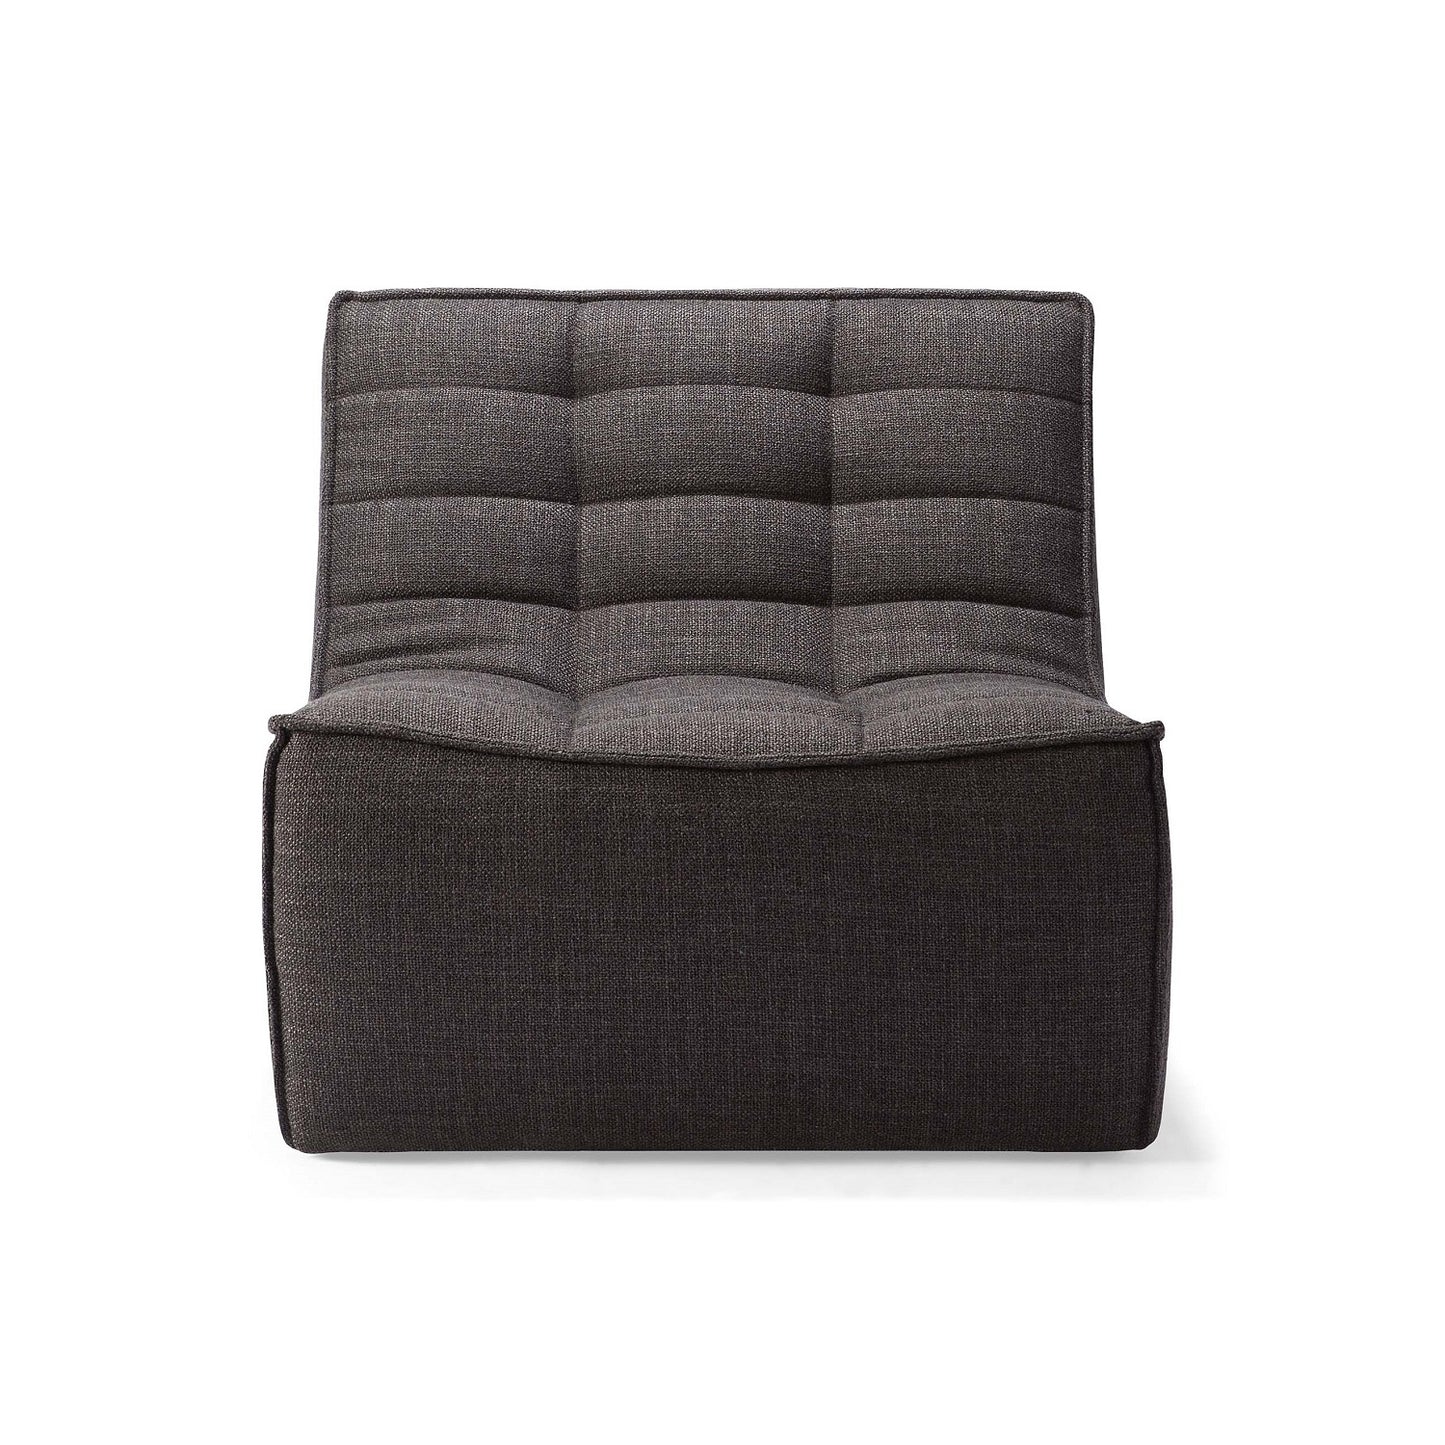 N701 Ethnicraft Slouch Sofa in Dark Grey fabric available from Make Your House A Home, Bendigo, Victoria, Australia